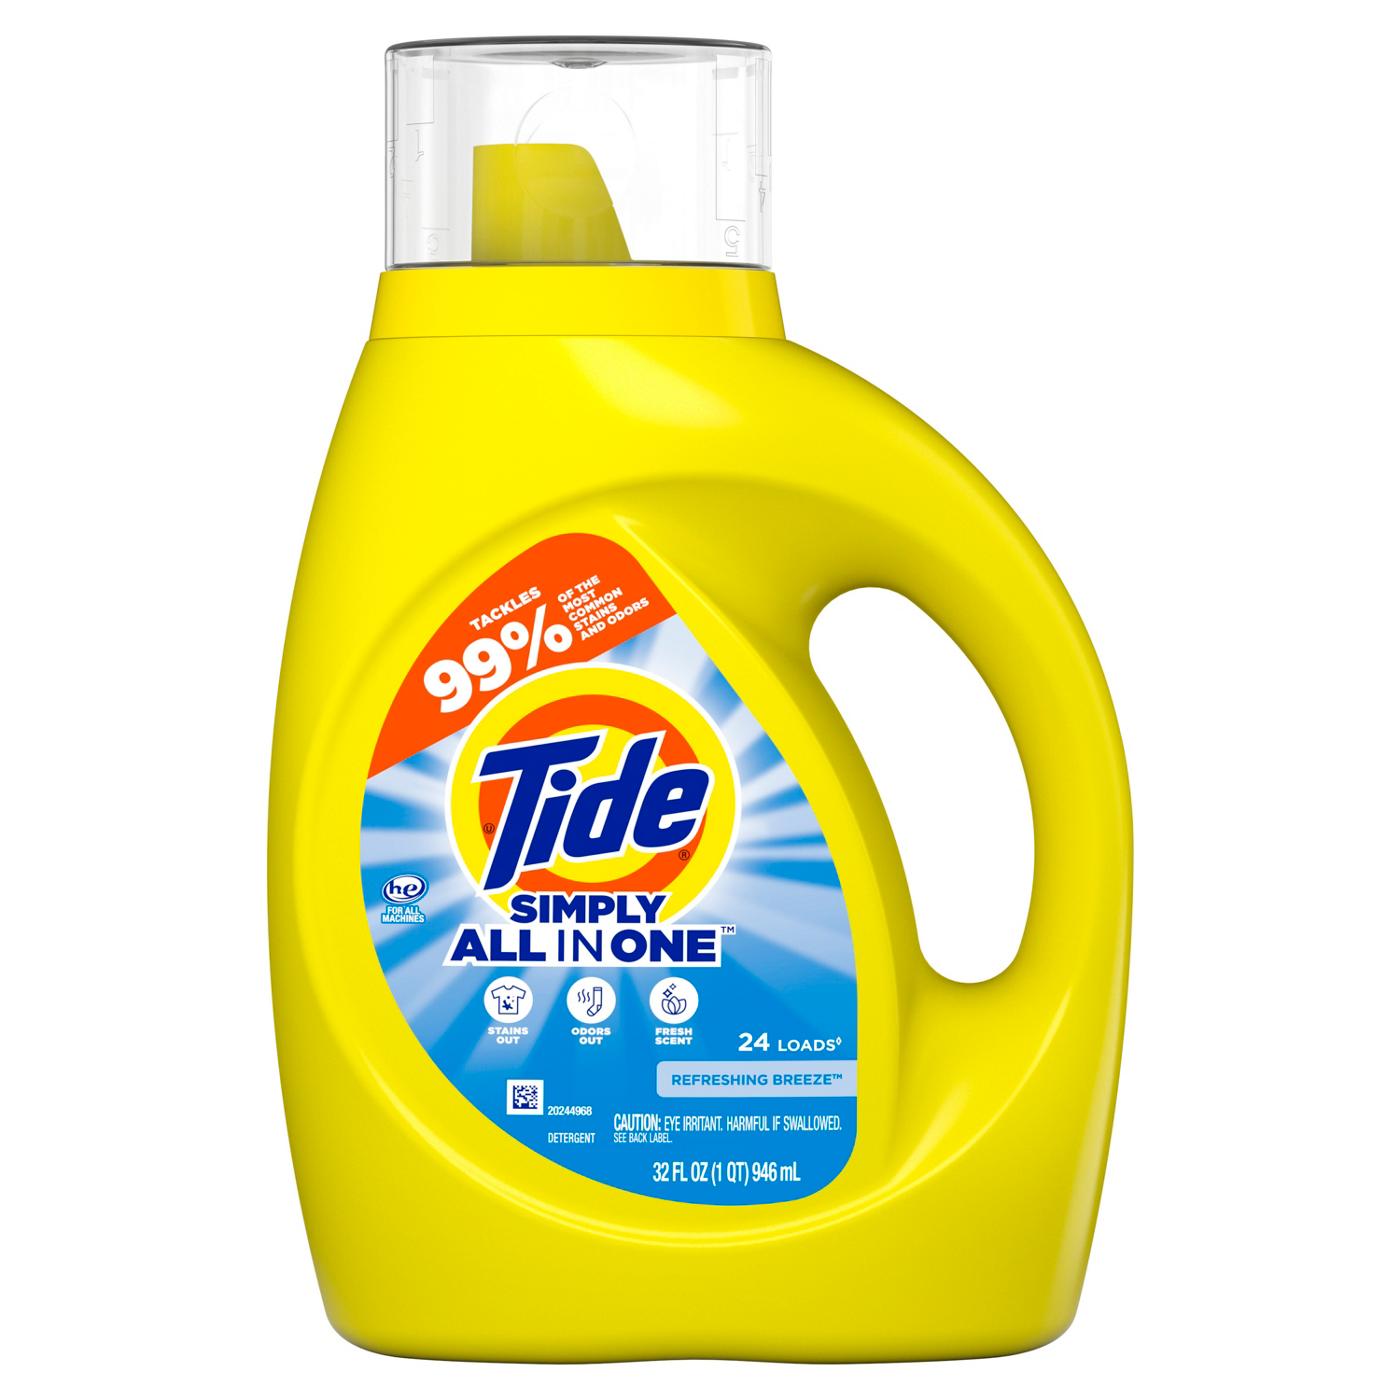 Tide Simply Clean & Fresh HE Liquid Laundry Detergent, 24 Loads - Refreshing Breeze; image 1 of 16